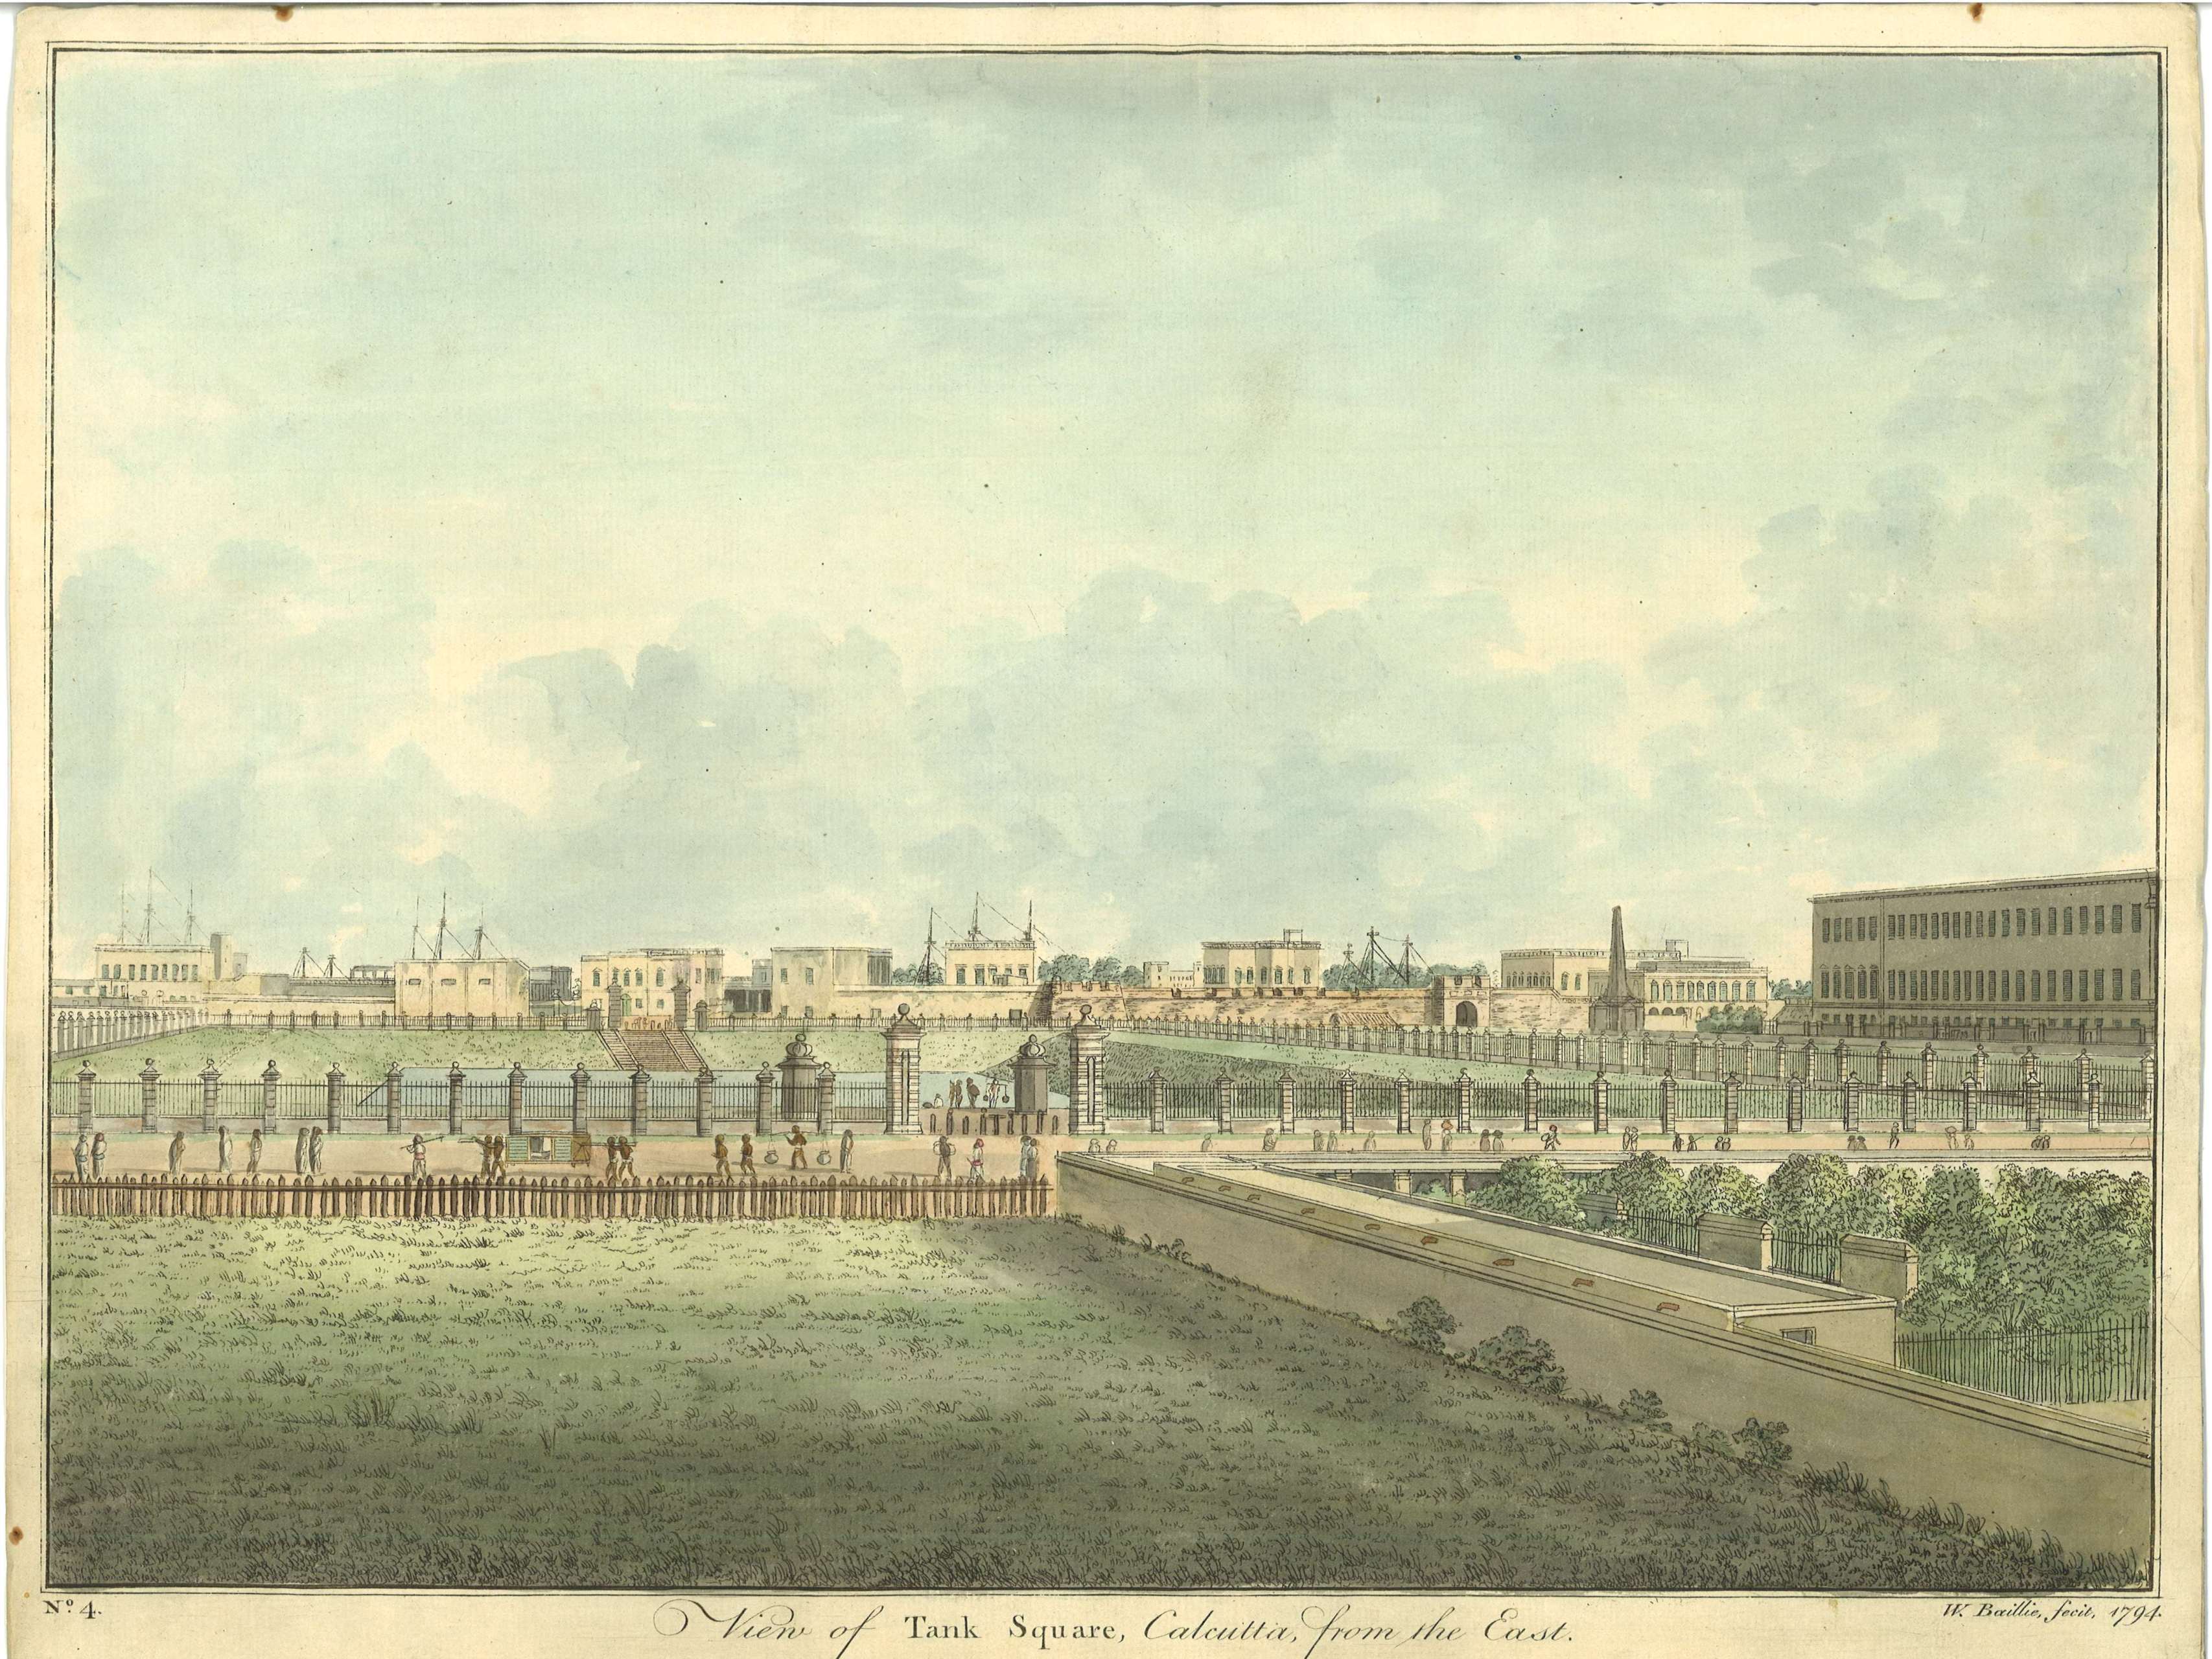 A view of the Tank Square, Calcutta, from the east / W. Baillie